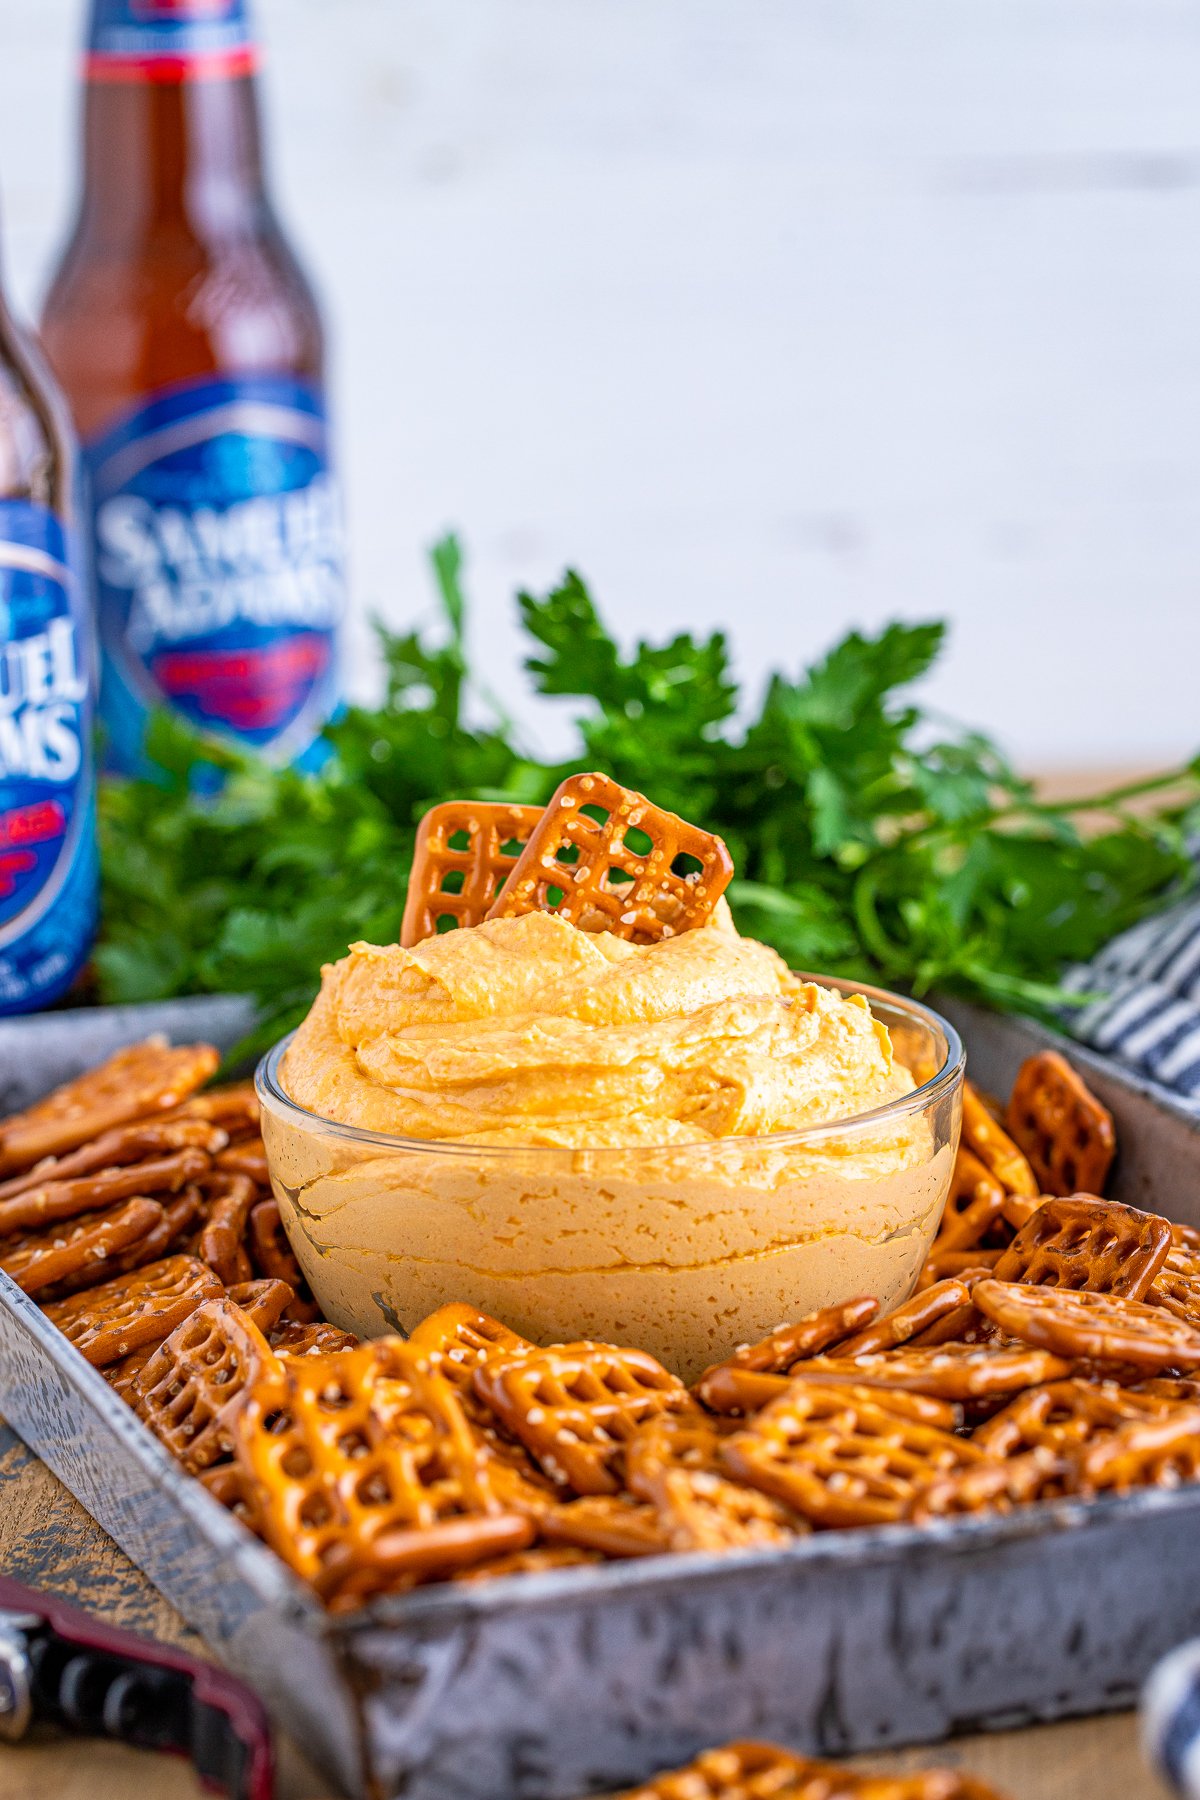 Pub Style Beer Cheese Dip surrounded by pretzels with pretzels in dip.